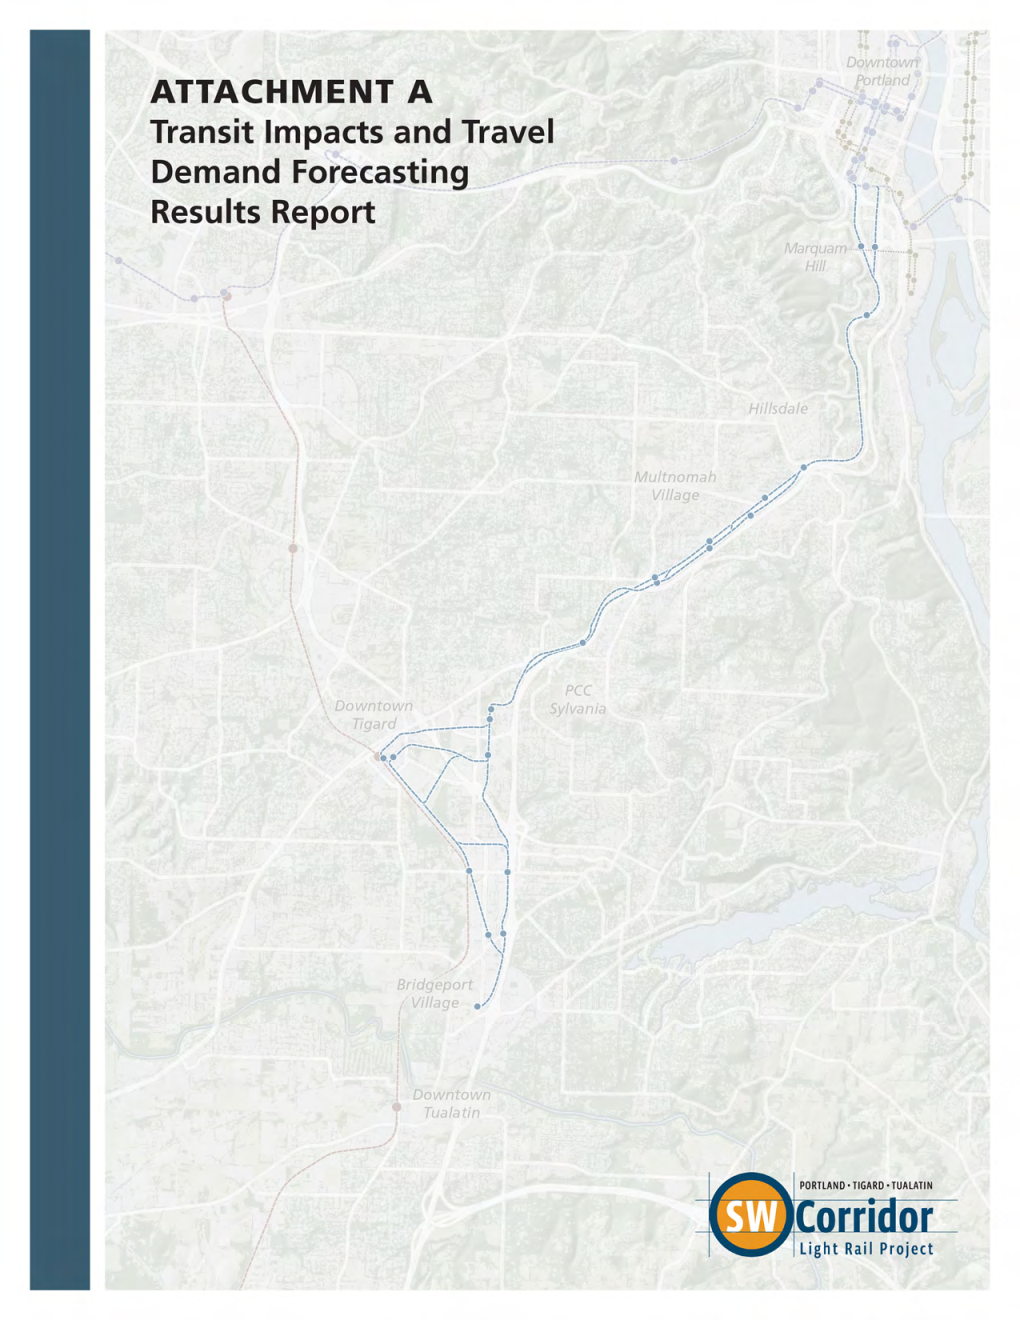 Transit Impacts and Travel Demand Forecasting Results Report